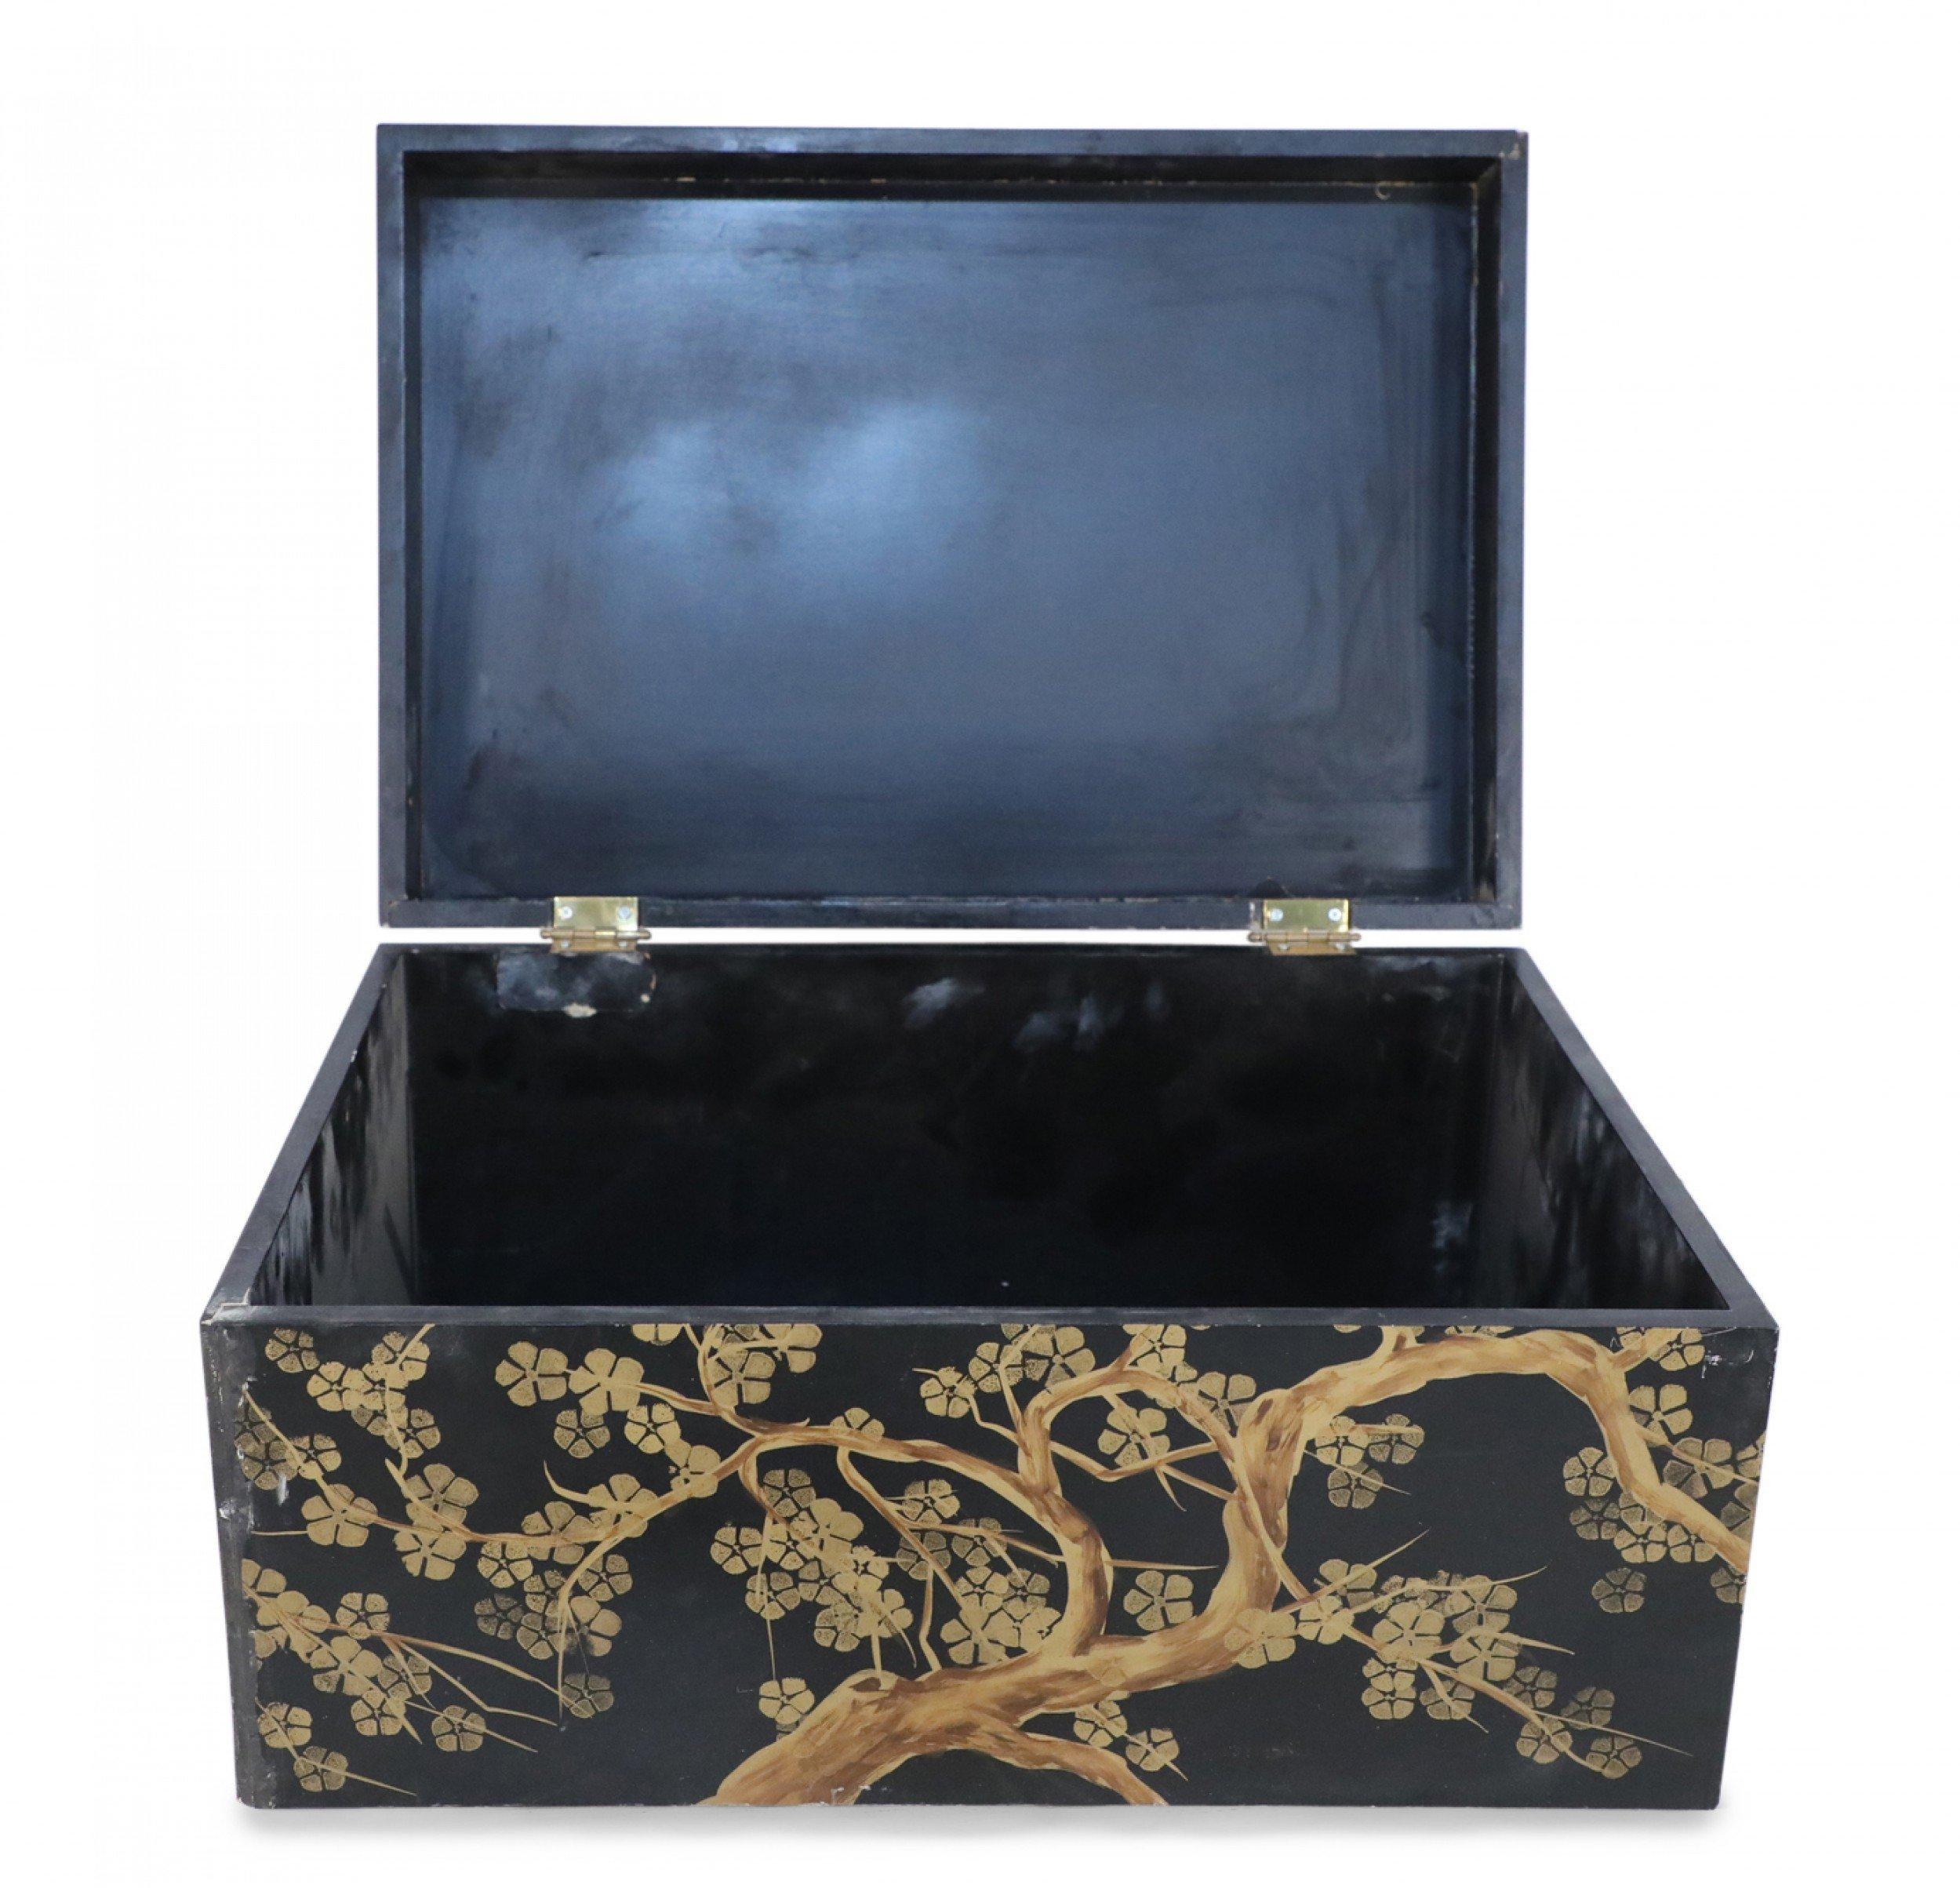 Chinese Gold and Black Painted Cherry Blossom Motif Decorative Box For Sale 1